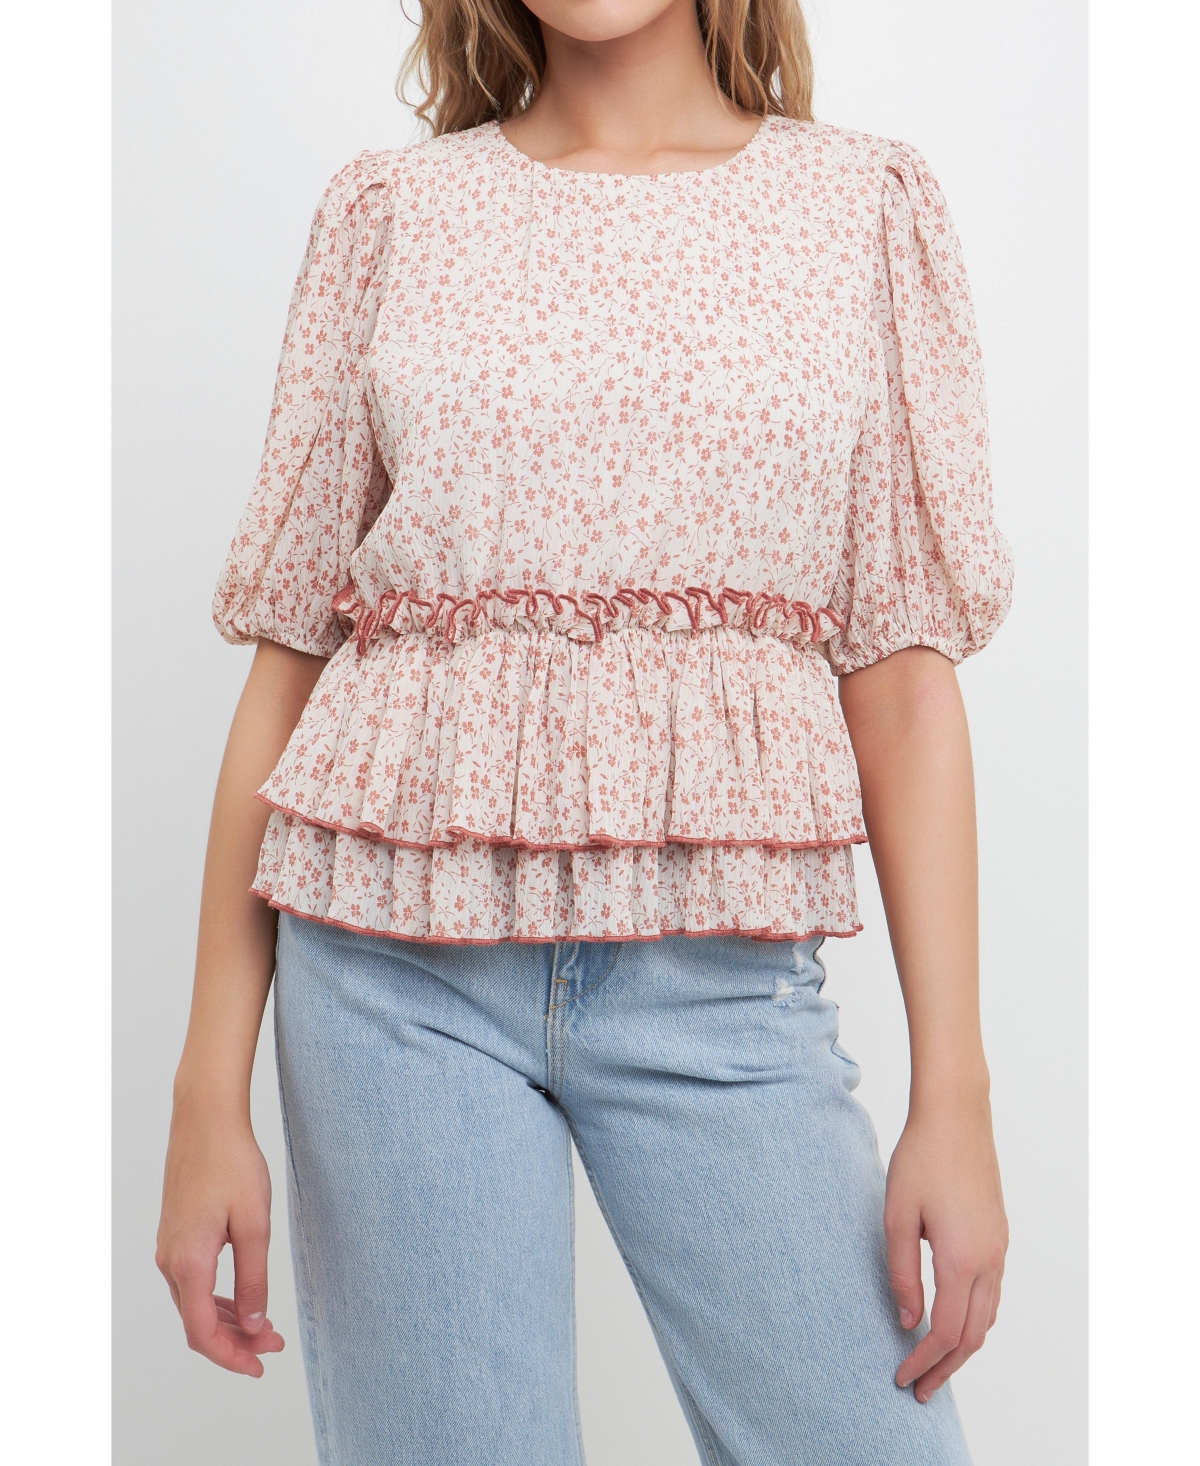 Free The Roses Women's Pleated Floral Top